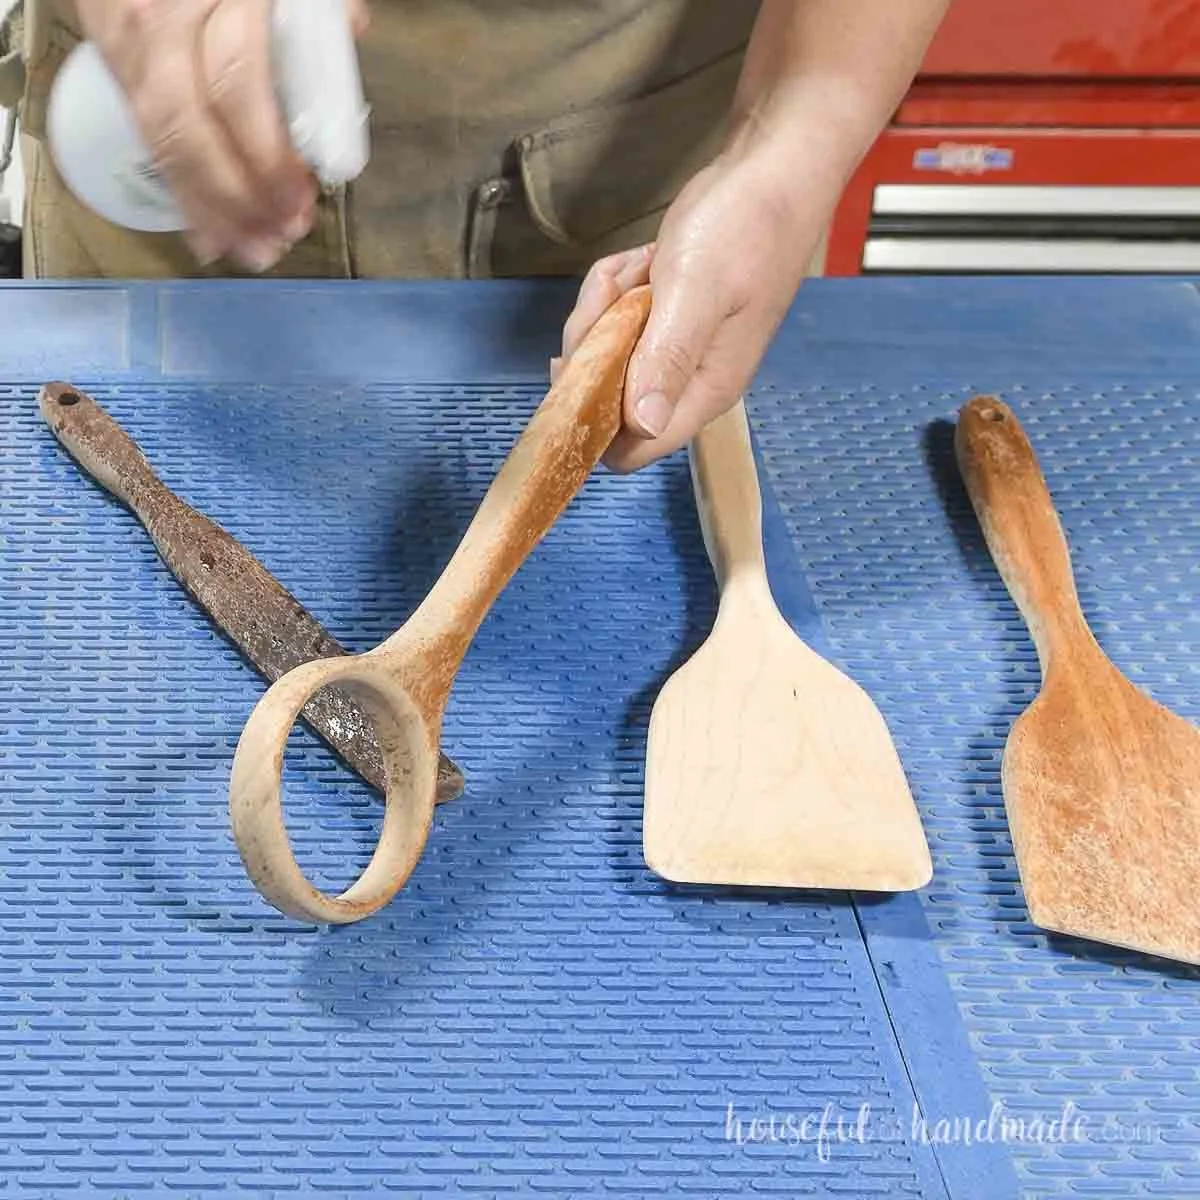 Spraying the sanded cooking utensils with water to raise the grain. 